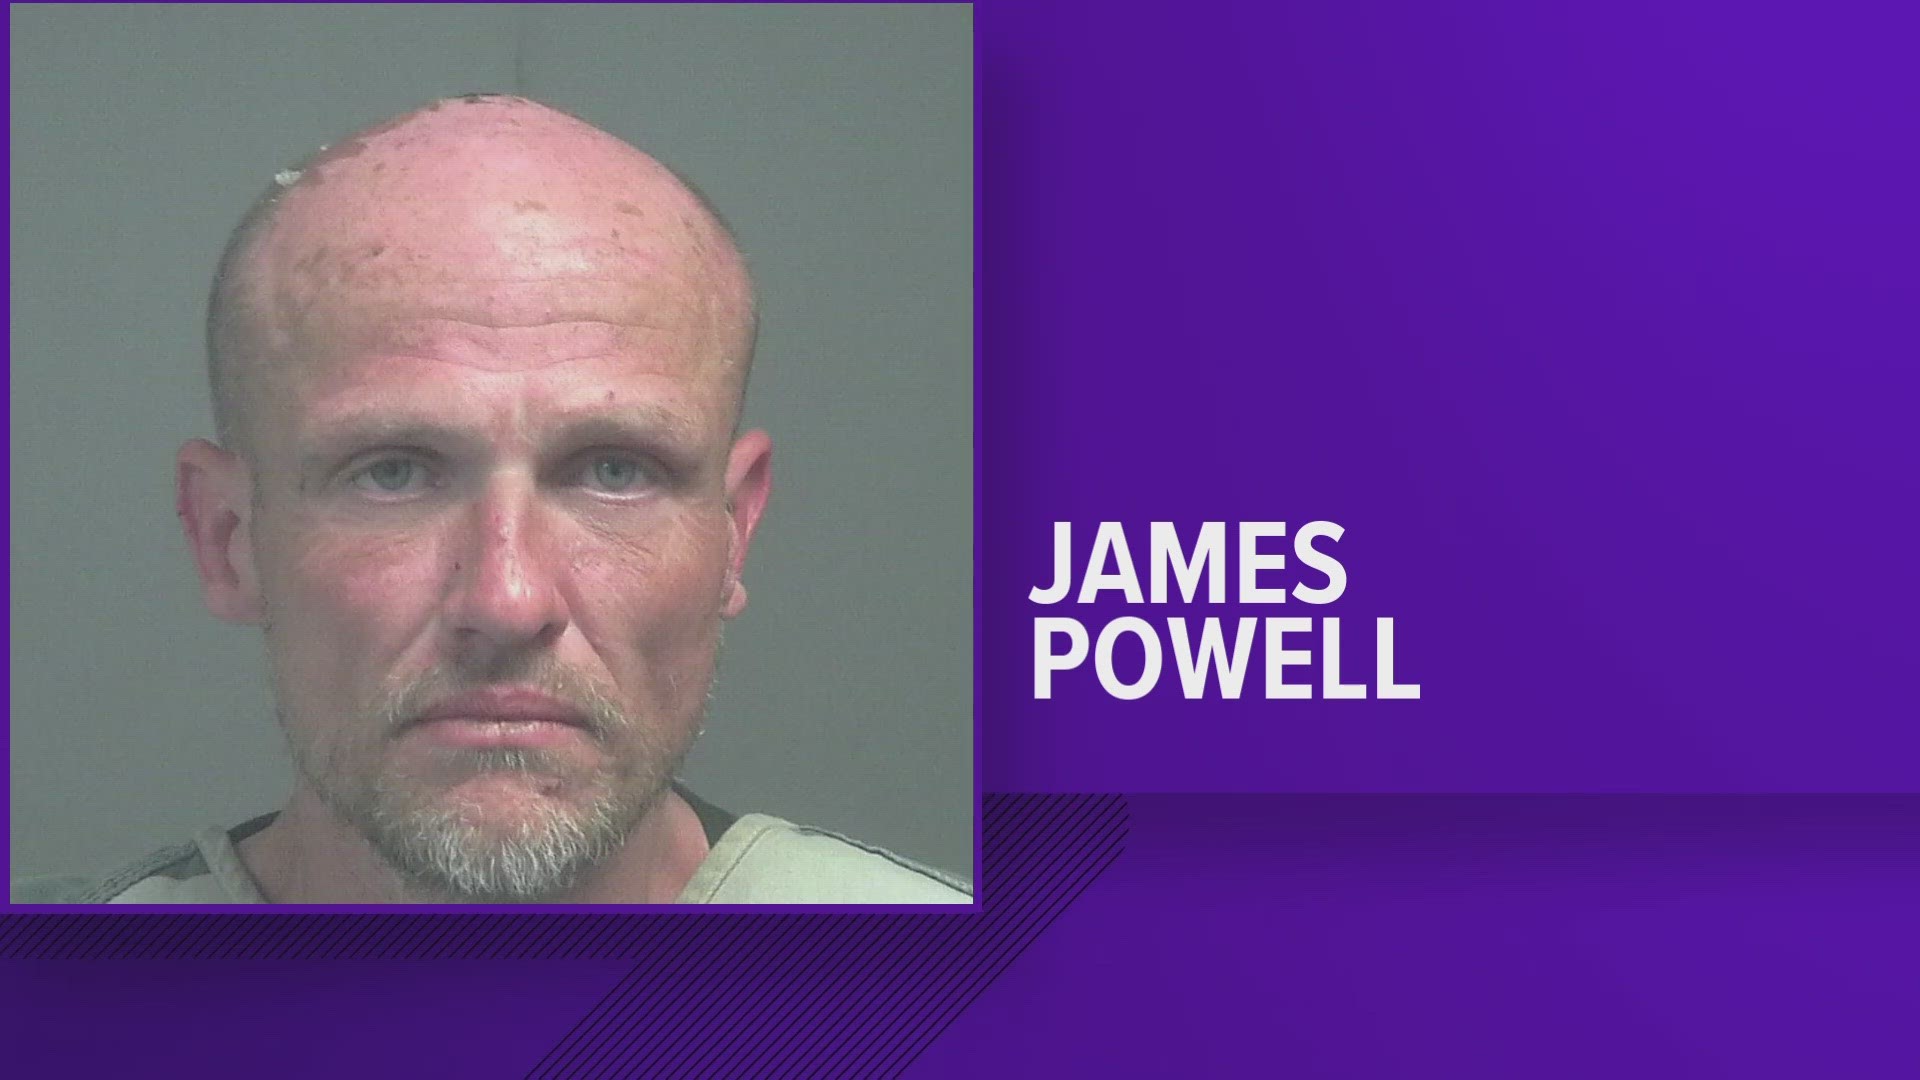 Blount County Sheriff's office said deputies arrested a man after he broke into multiple homes armed with a metal pipe.